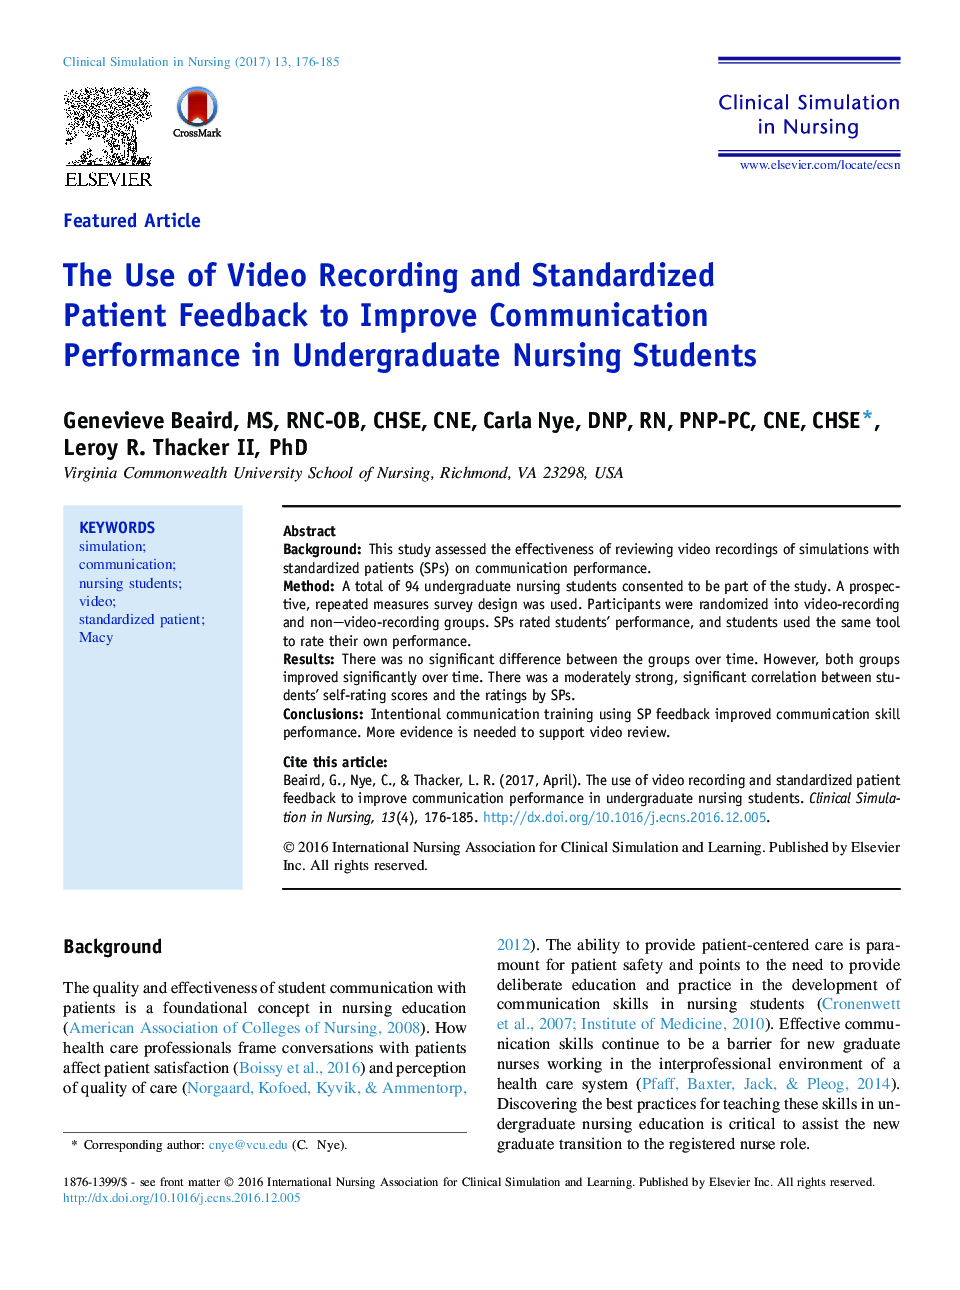 The Use of Video Recording and Standardized Patient Feedback to Improve Communication Performance in Undergraduate Nursing Students